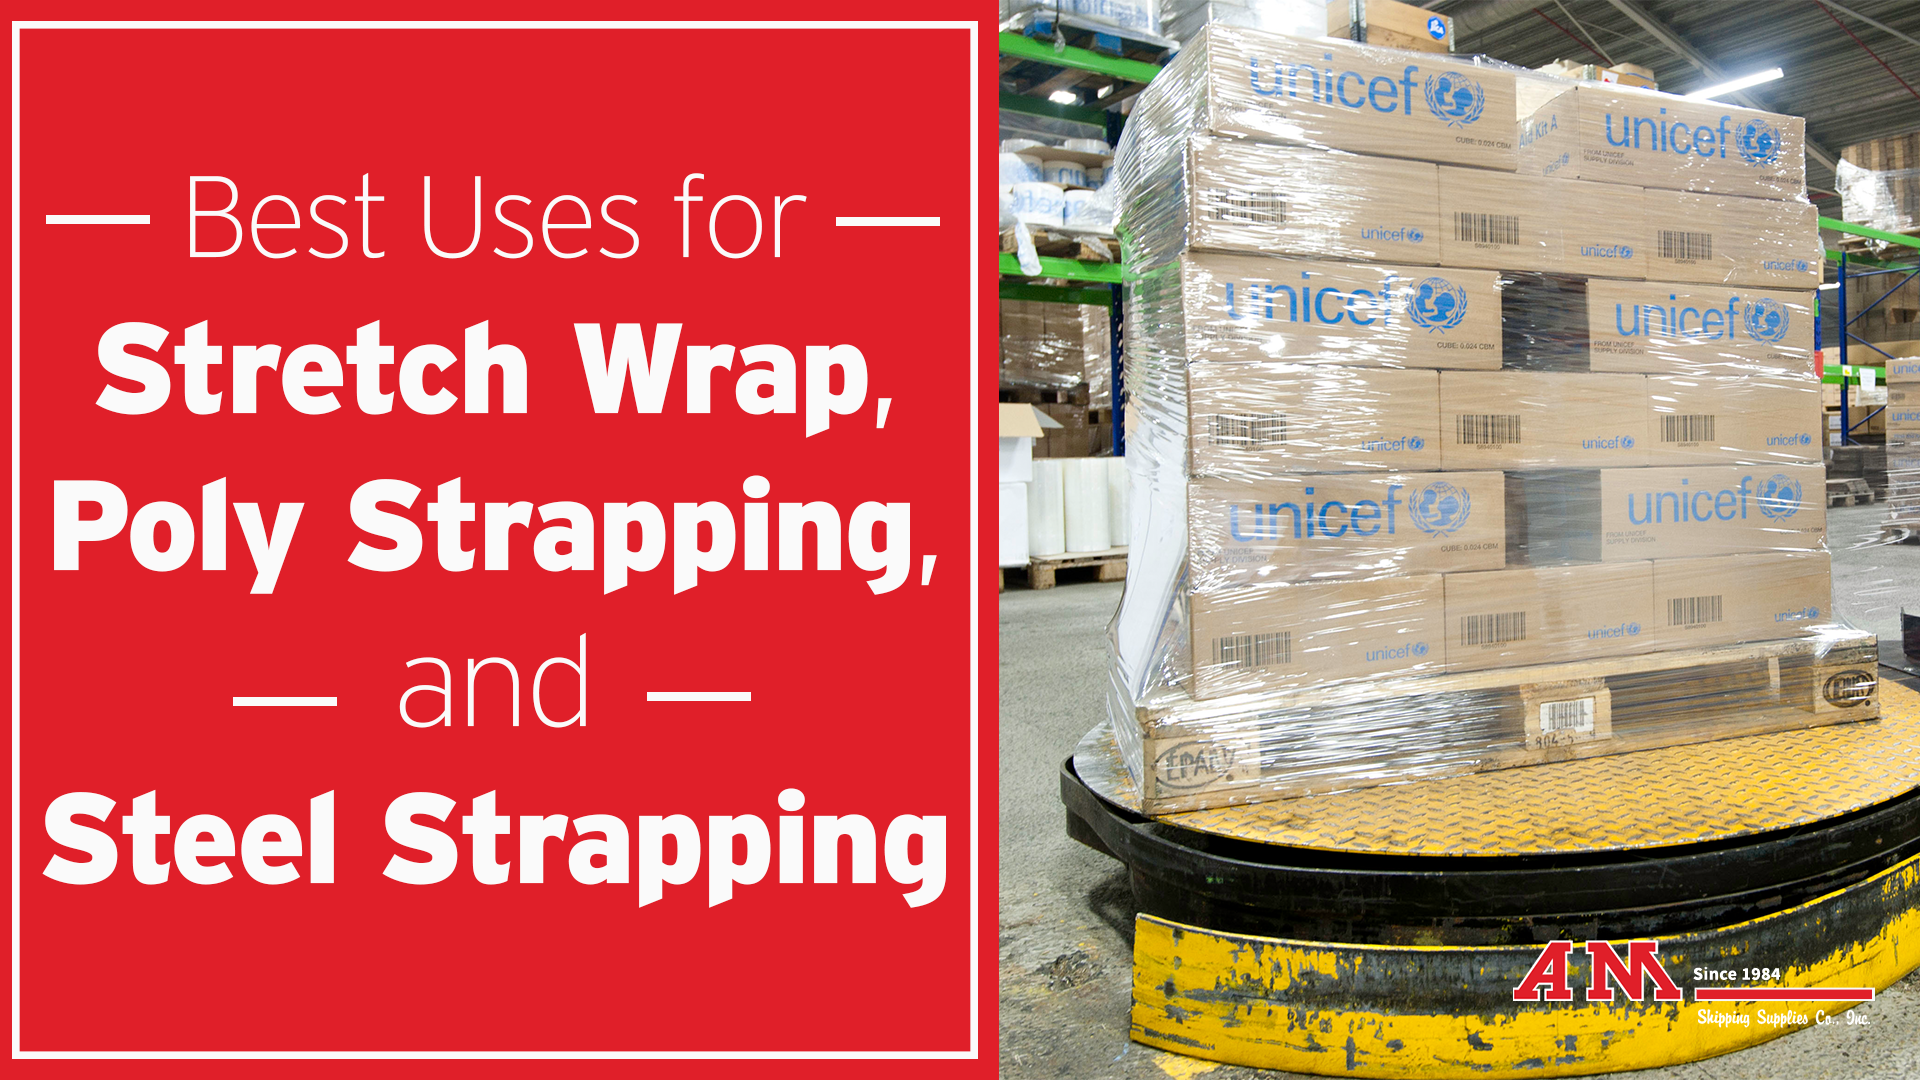 Best Uses for Stretch Wrap, Poly Strapping, and Steel Strapping